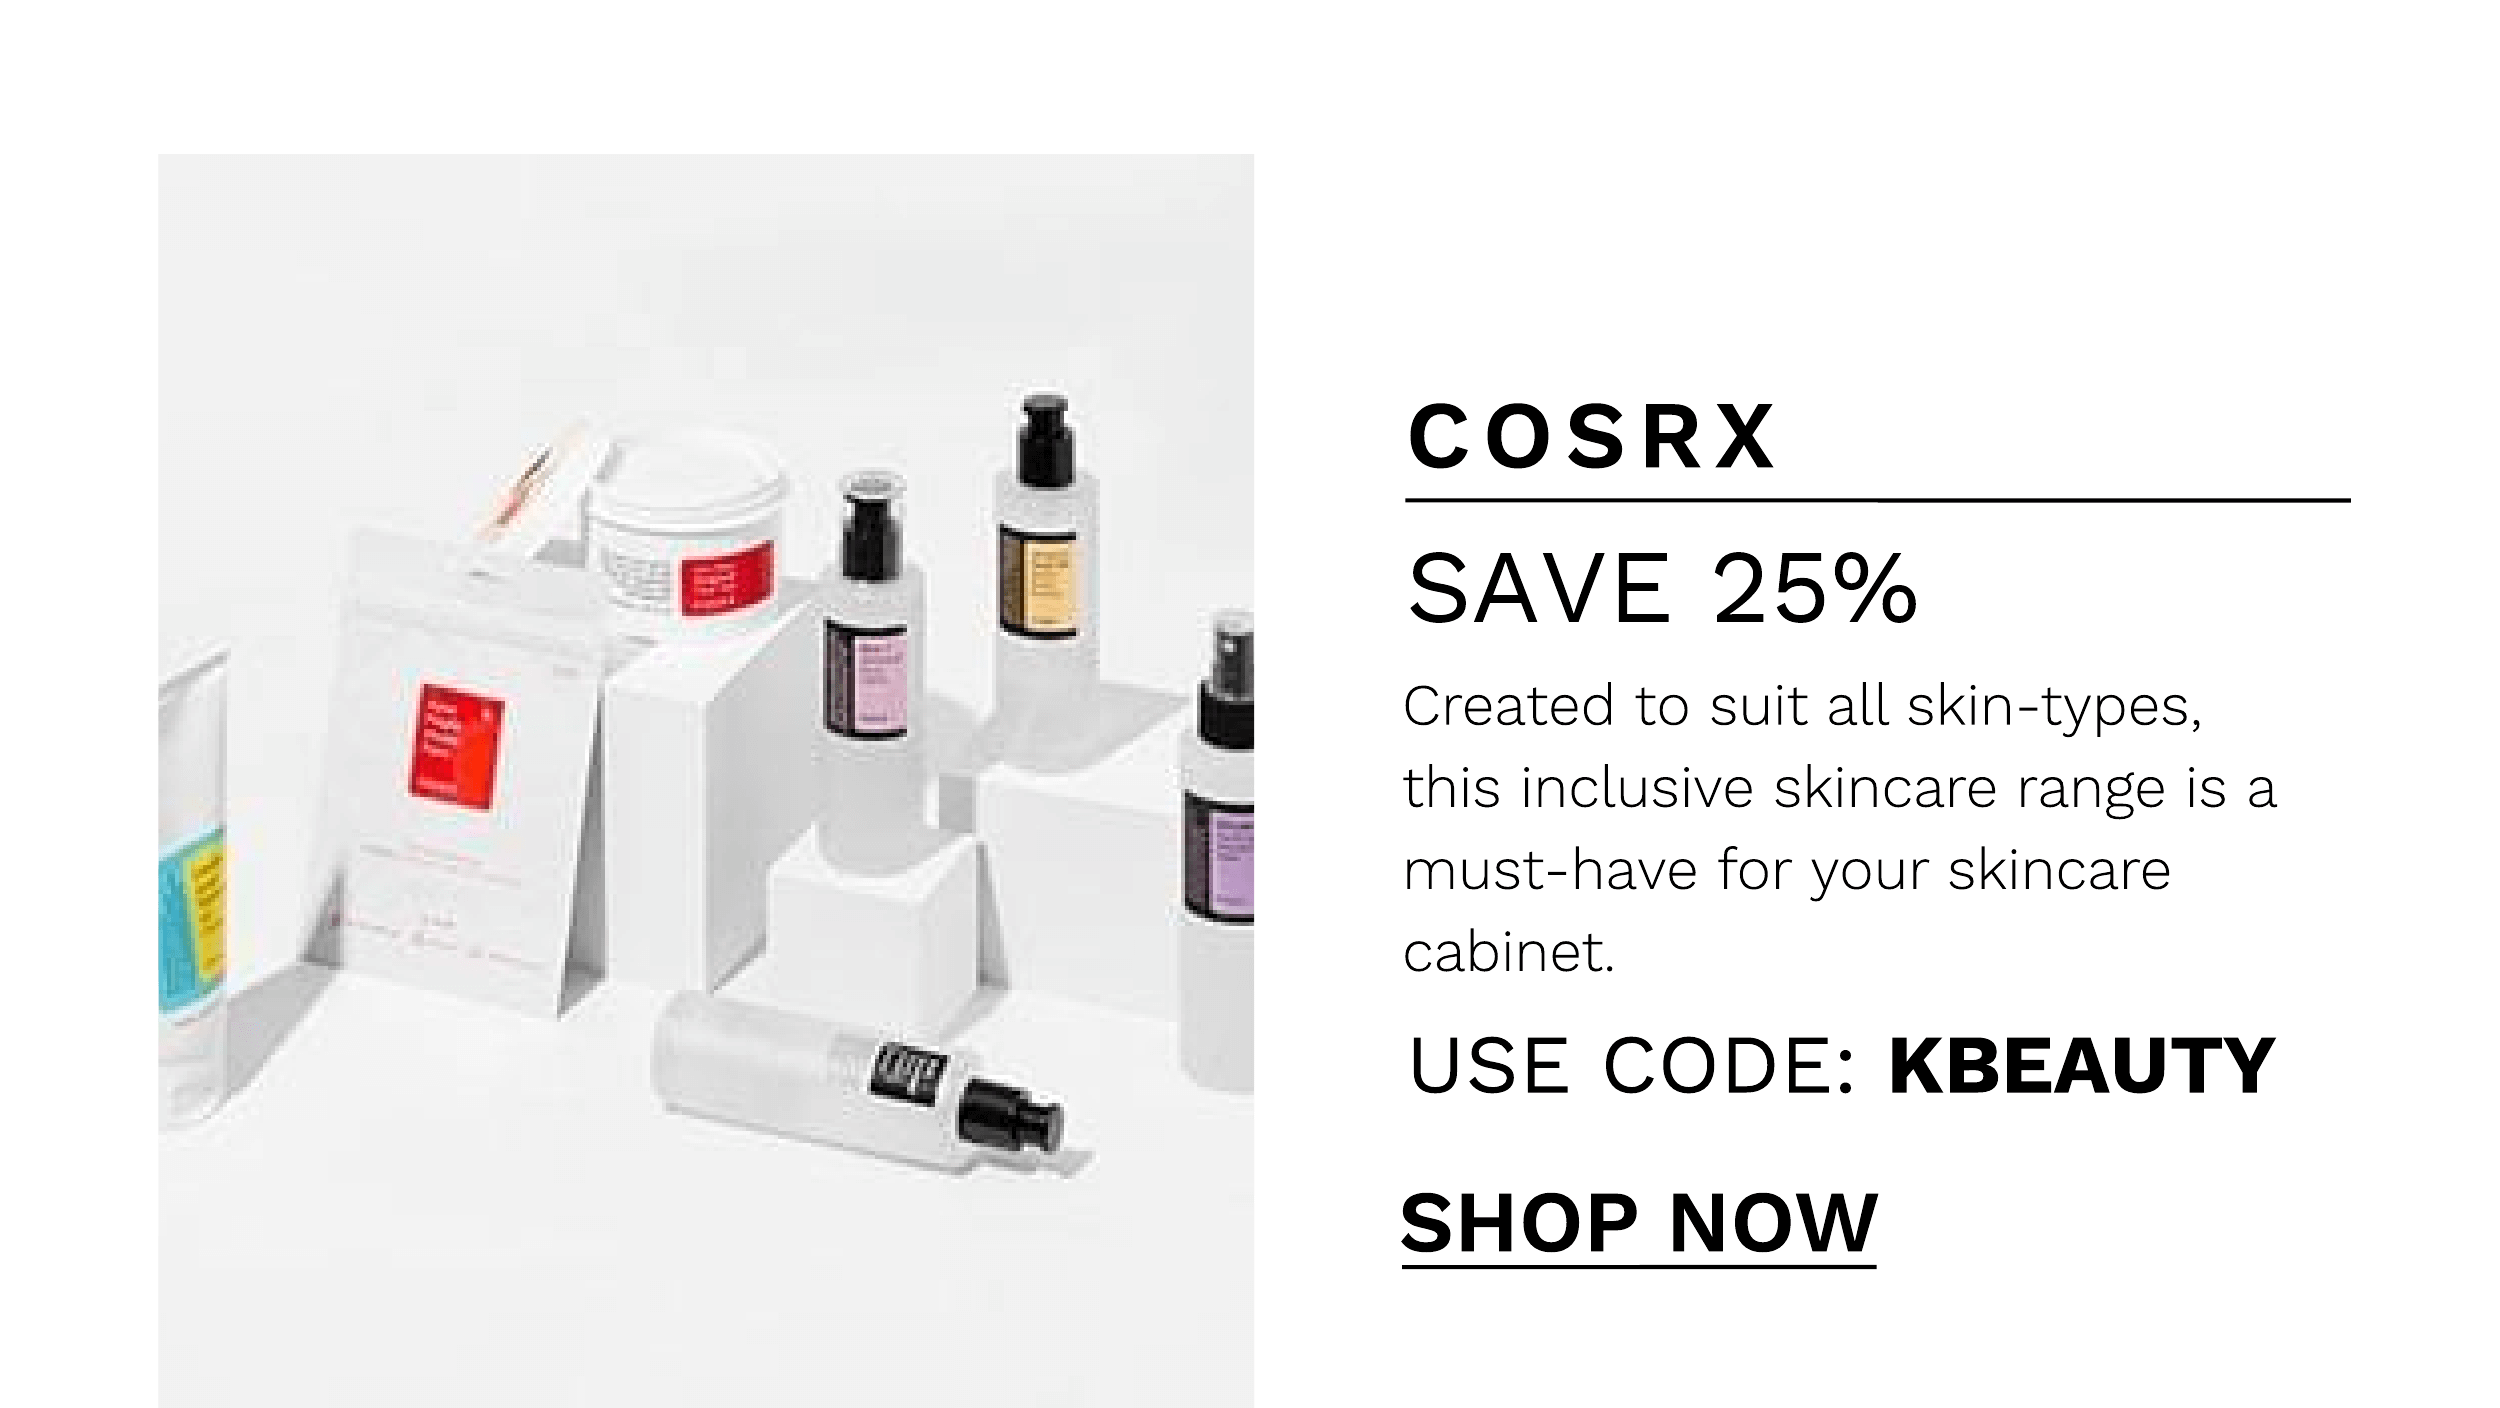 HH COSRX SAVE 25% Created to suit all skin-types, this inclusive skincare range is a must-have for your skincare cabinet. USE CODE: KBEAUTY SHOP NOW 